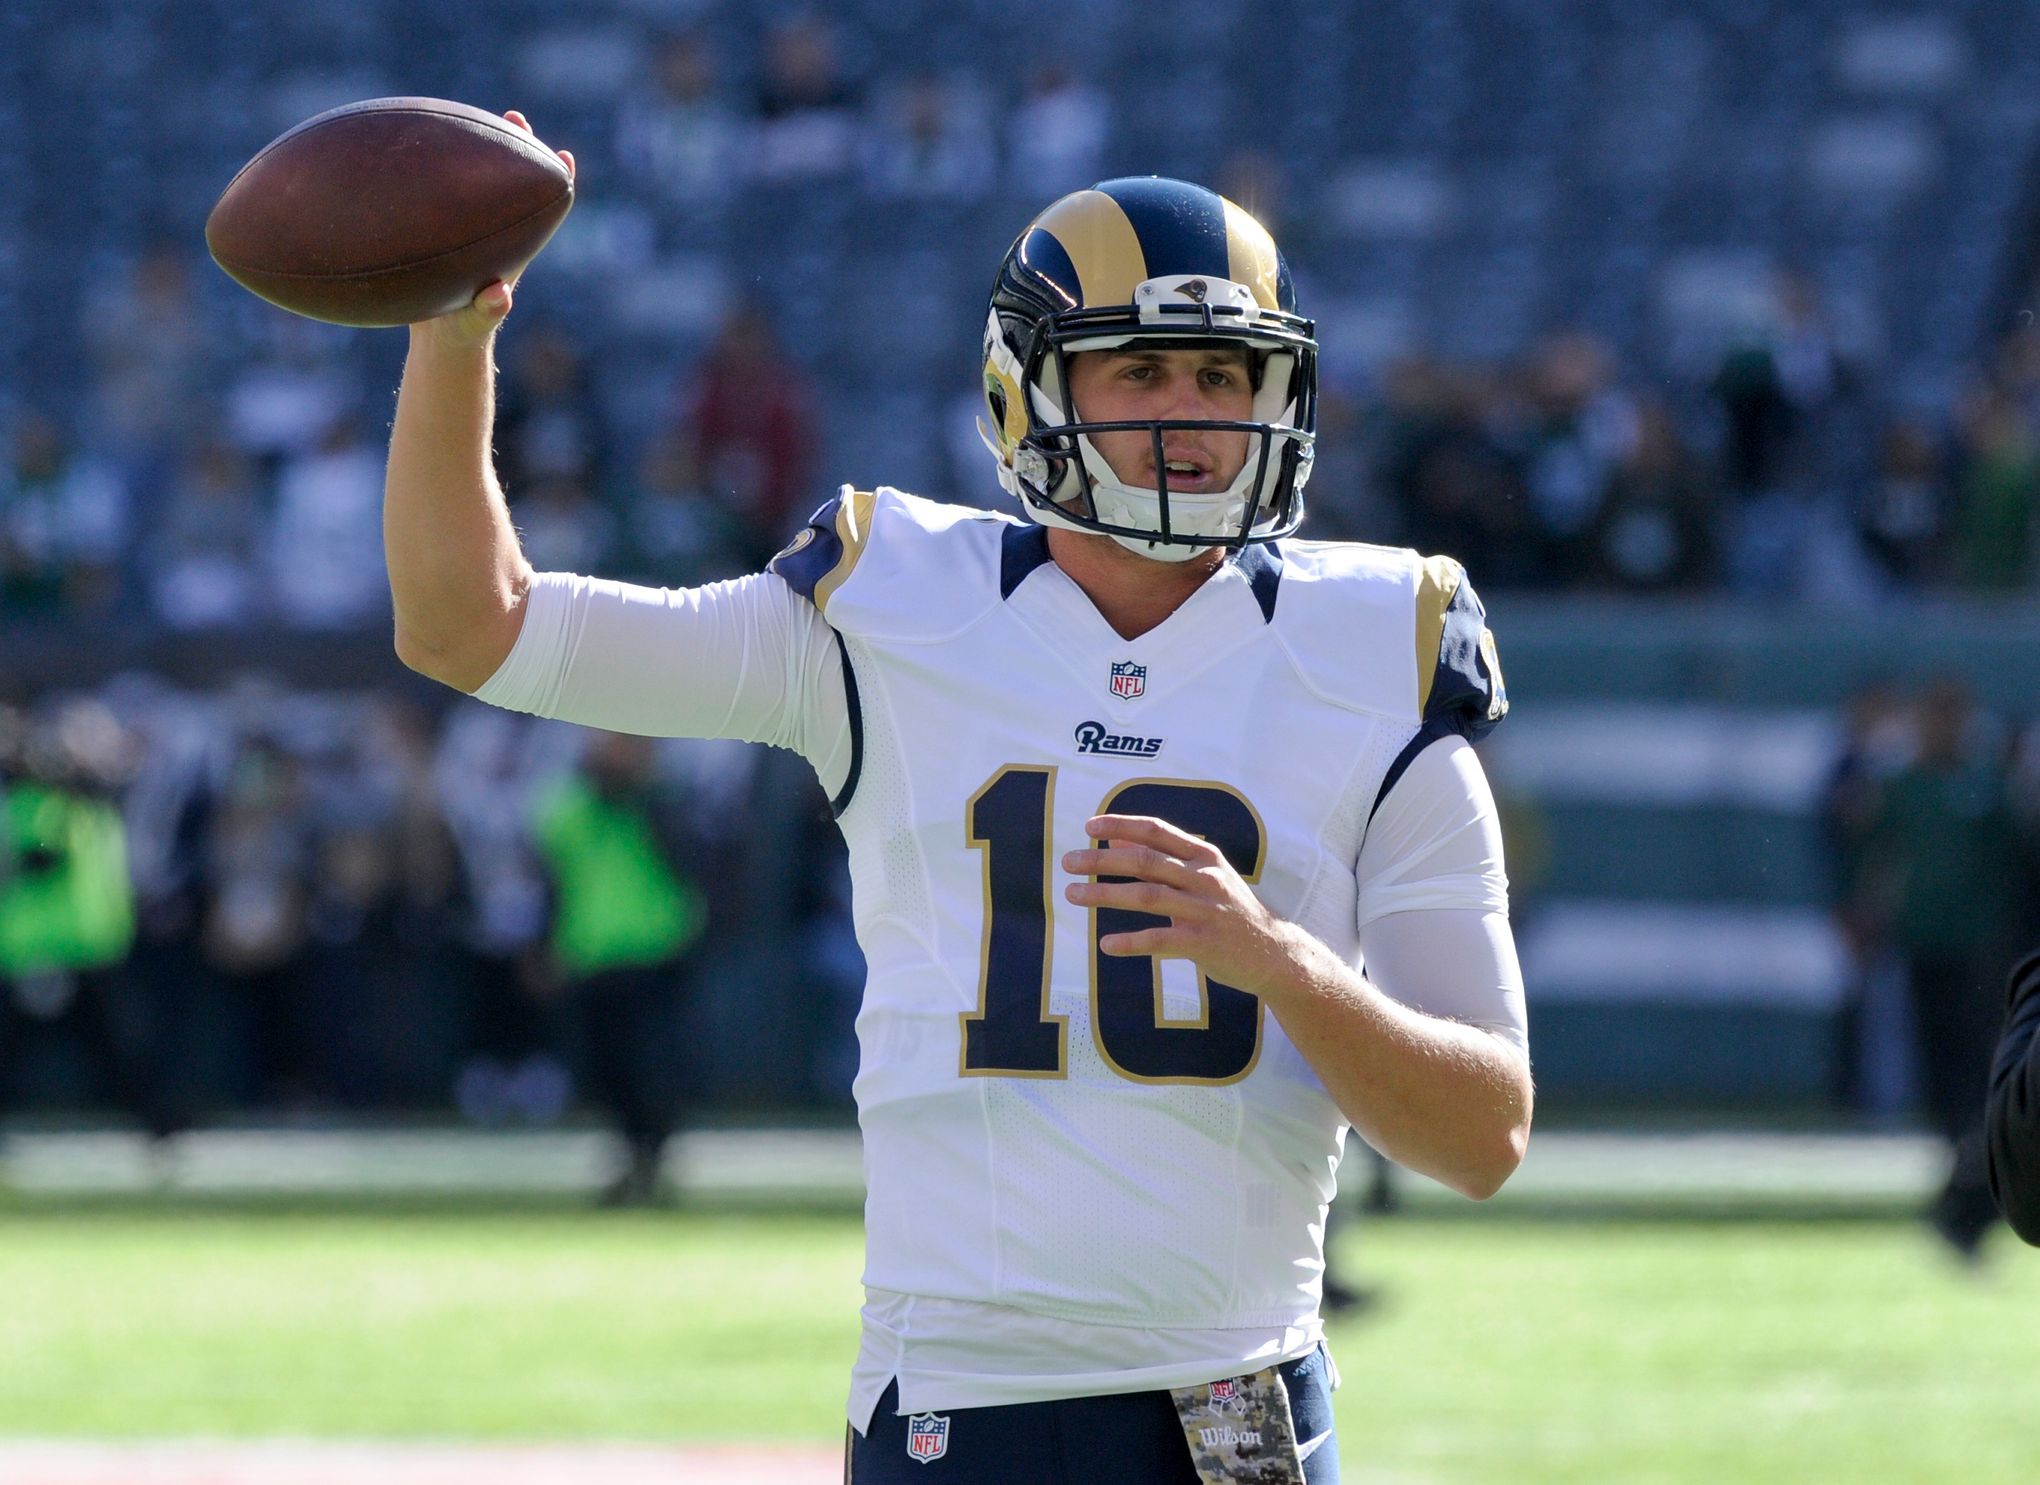 LA Rams Take Jared Goff With No. 1 Pick in NFL Draft